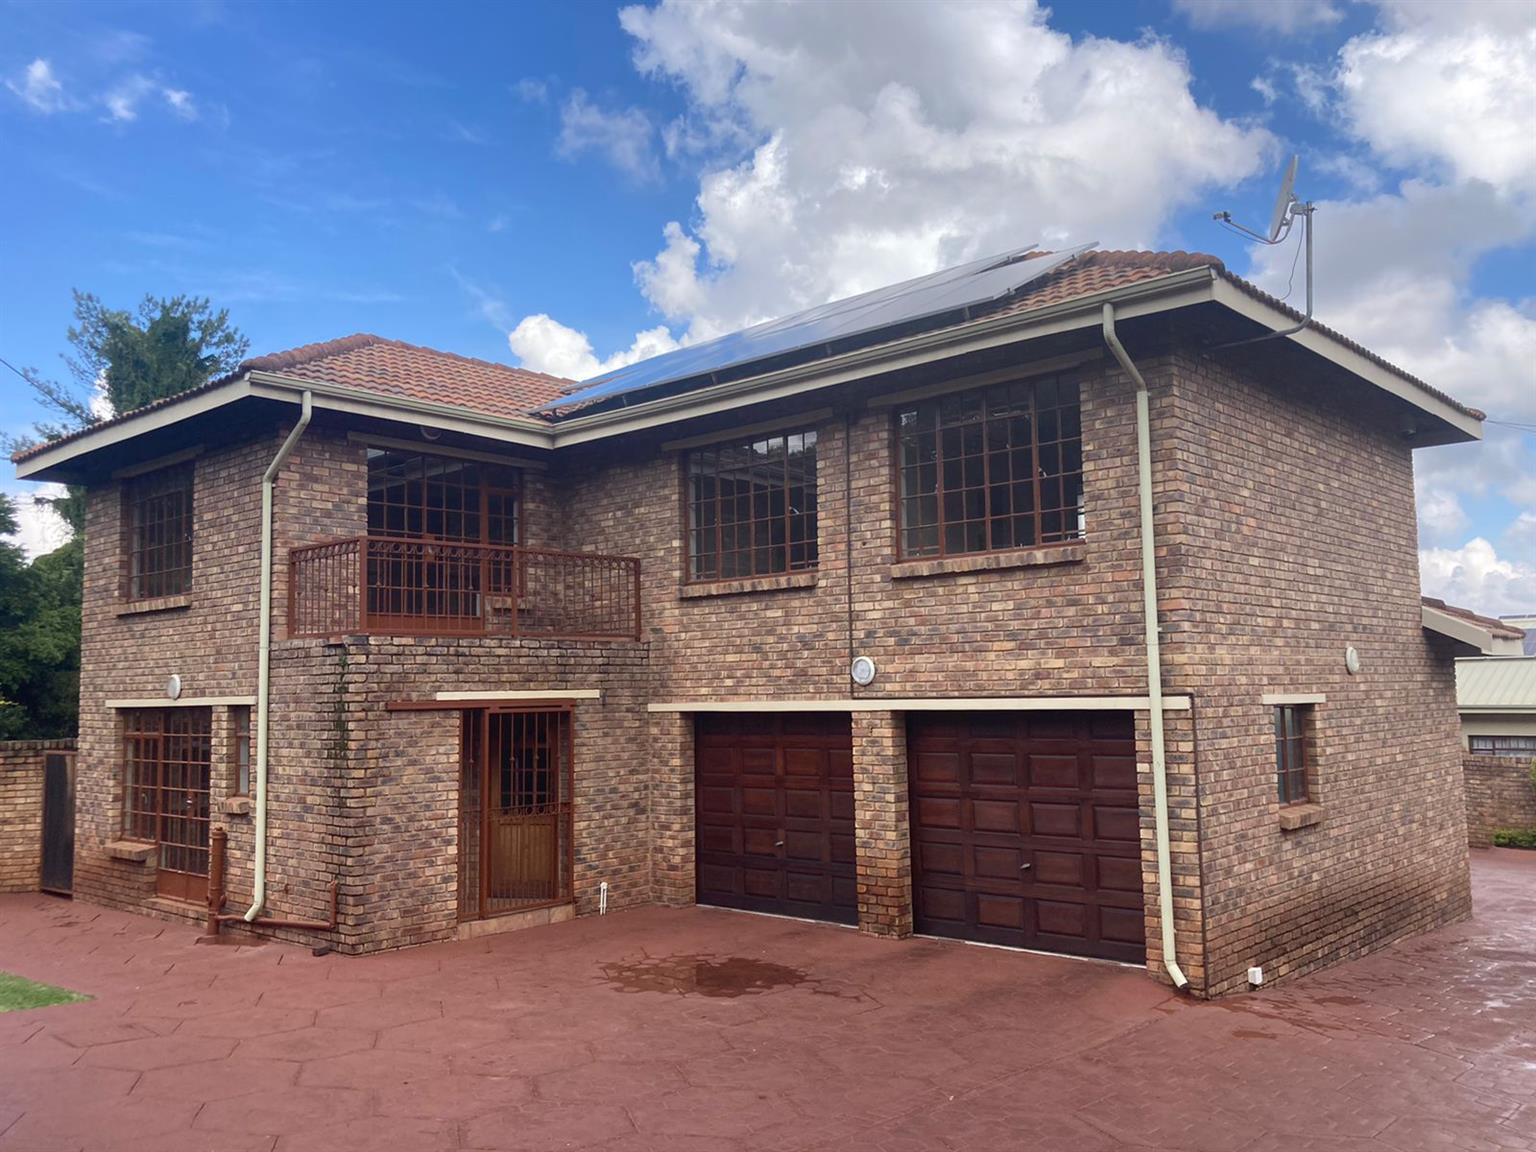 3 bedroom double Storey house for rent